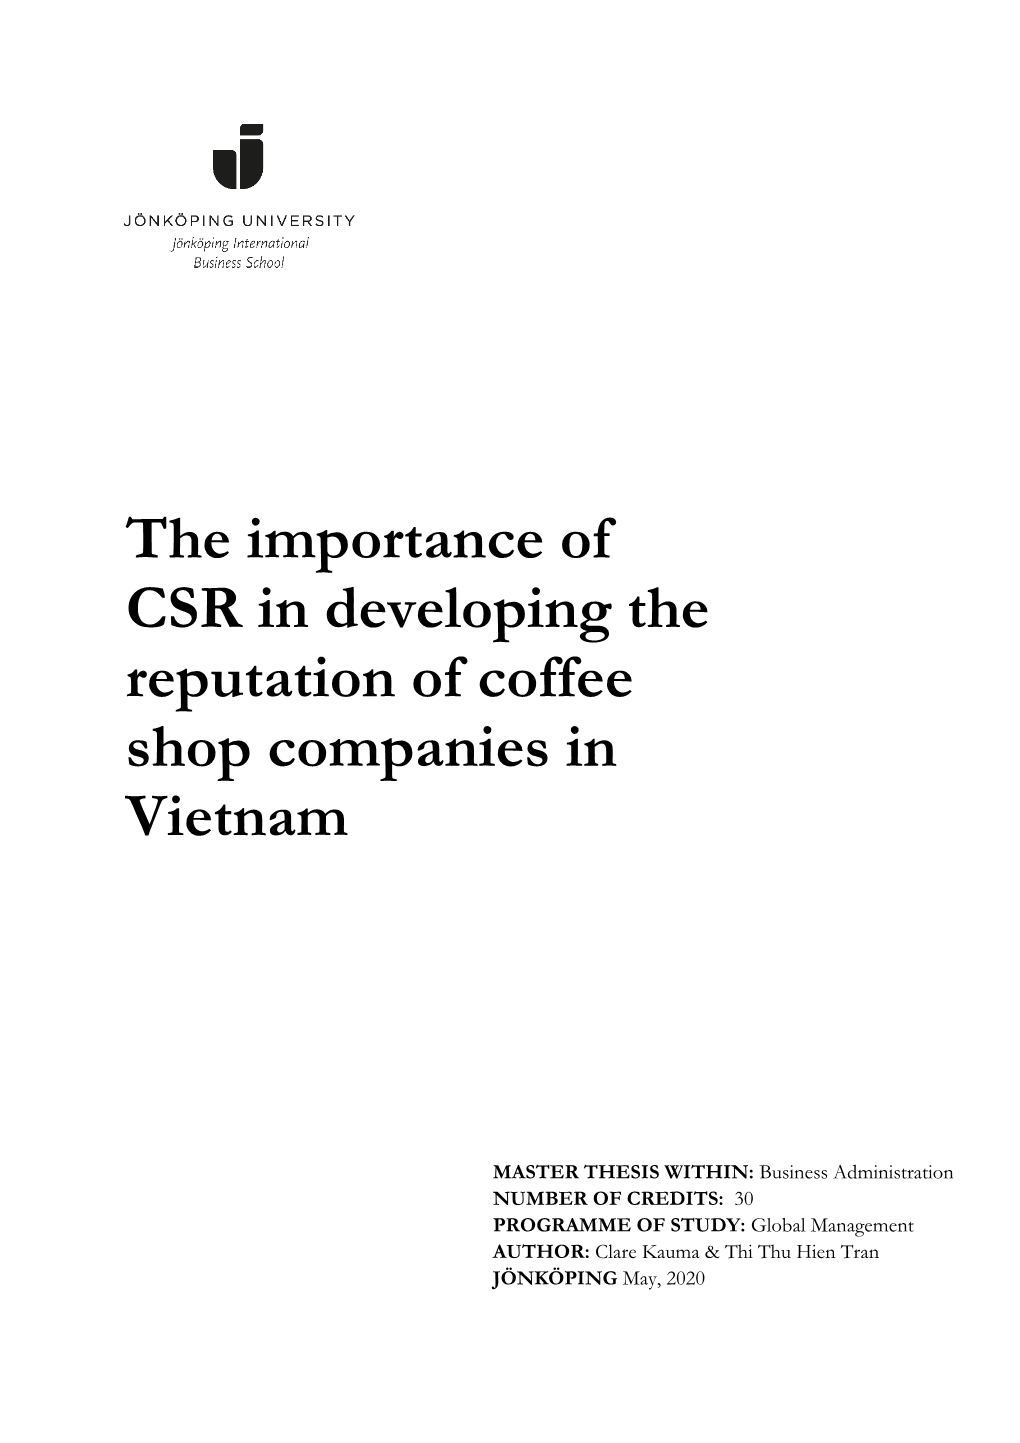 The Importance of CSR in Developing the Reputation of Coffee Shop Companies In